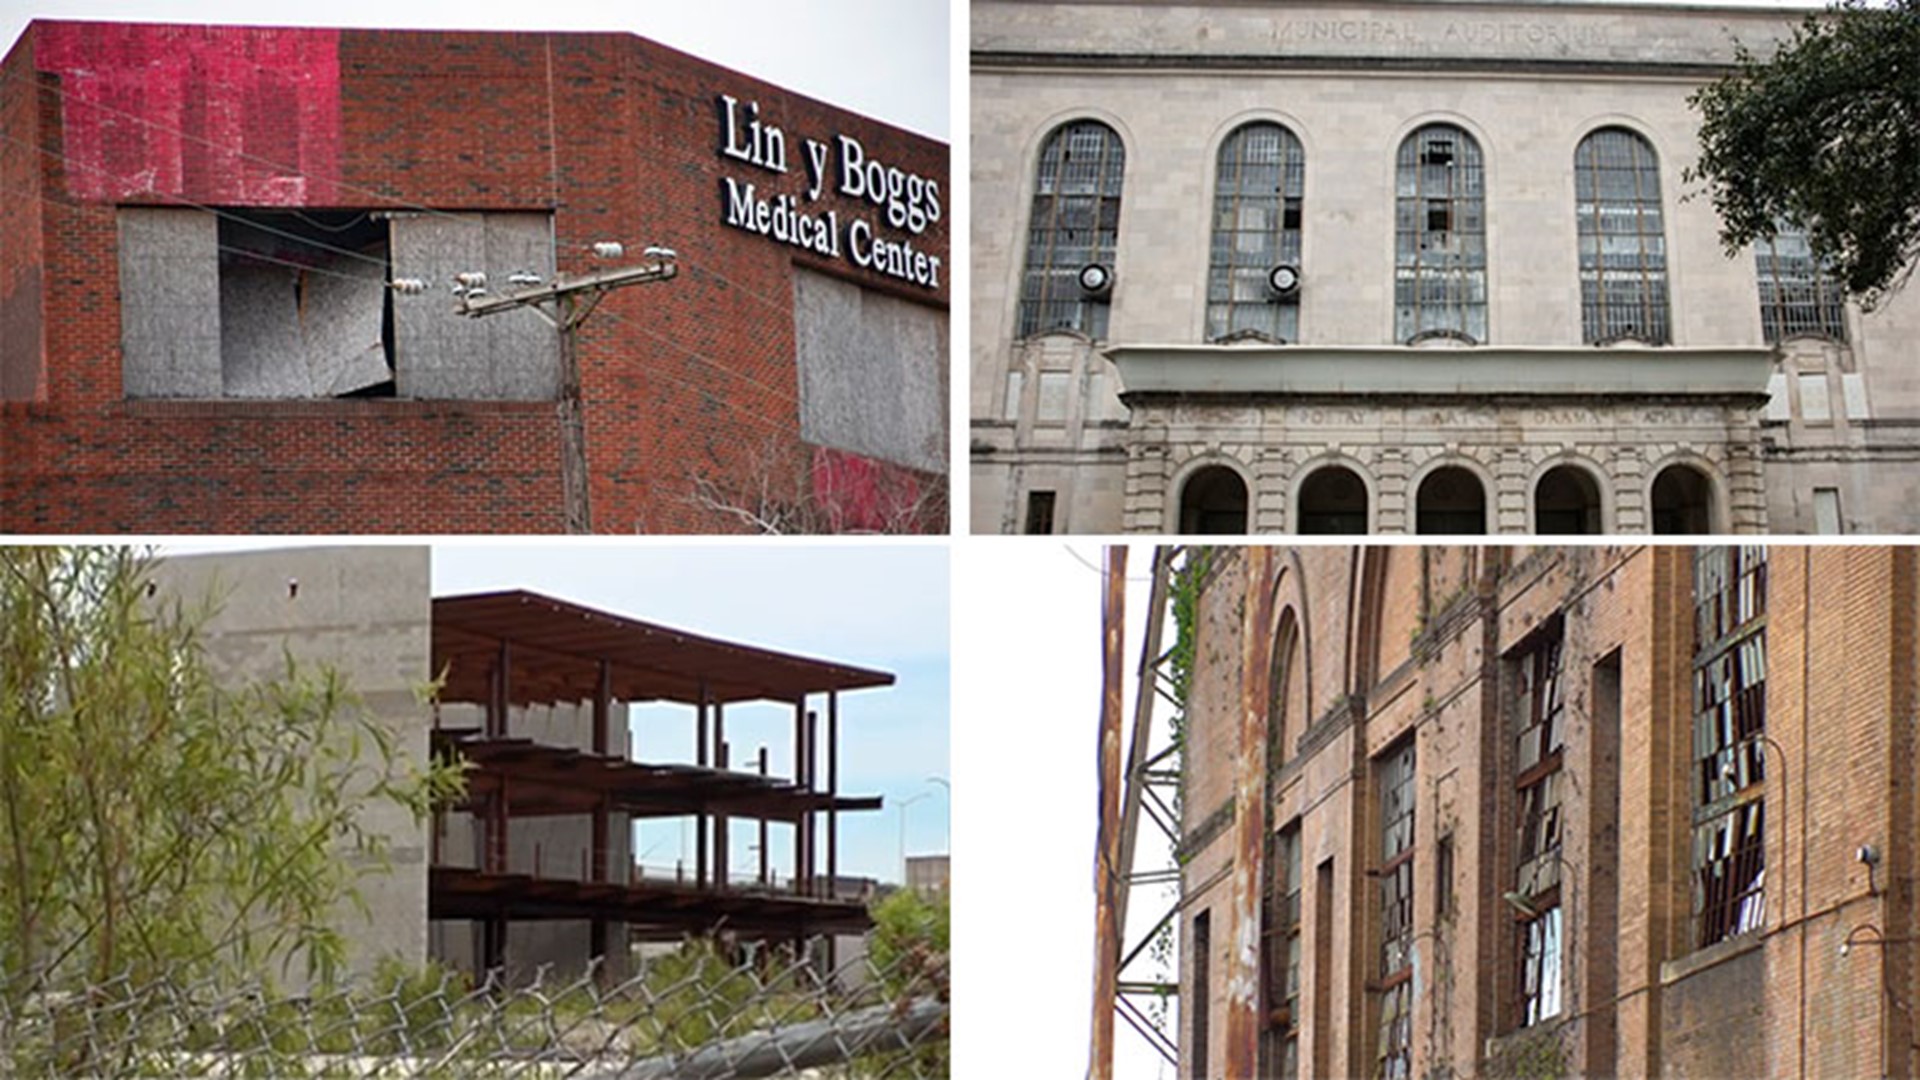 New Orleans has several vacant or blighted buildings that are eyesores in the city. Danny Monteverde has an update on plans for some of them.